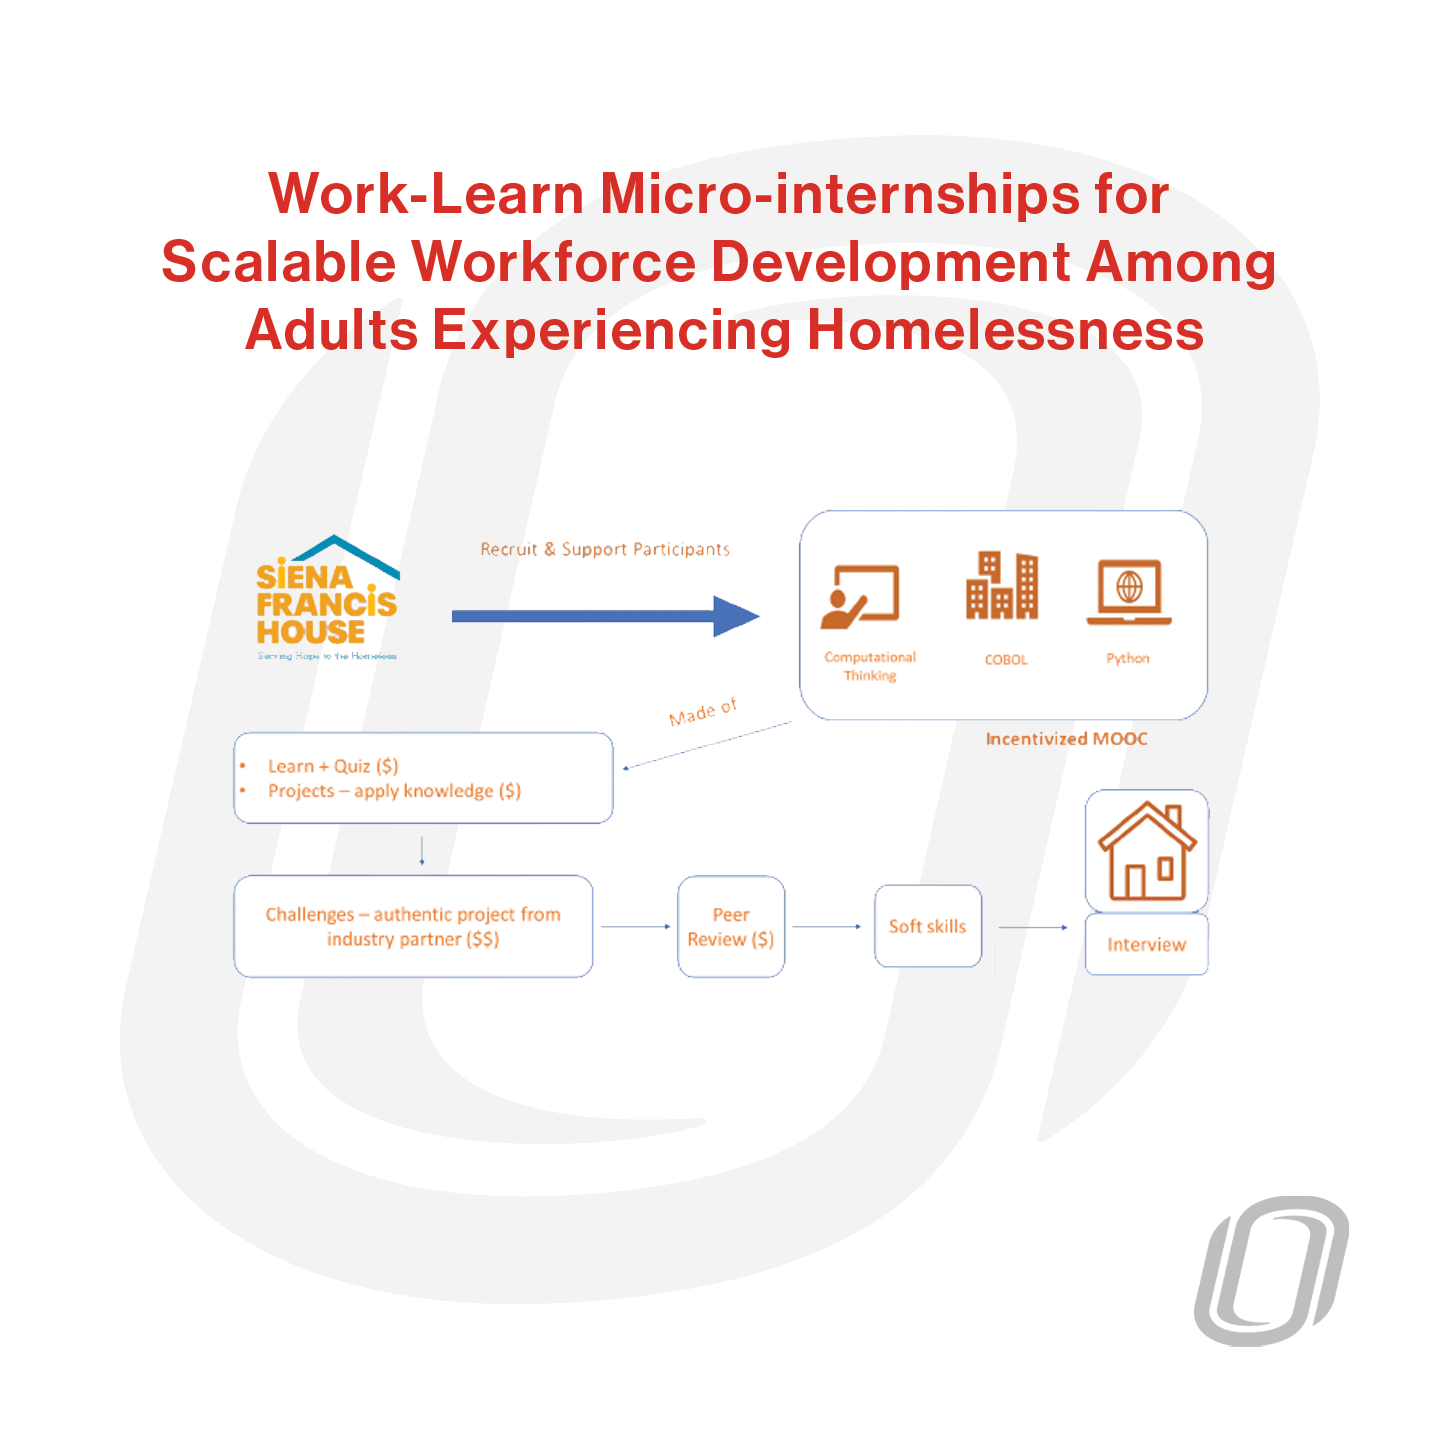 an in-depth diagram that shows a work-learn micro-internship process for scalable workforce development among adults experiencing homelessness